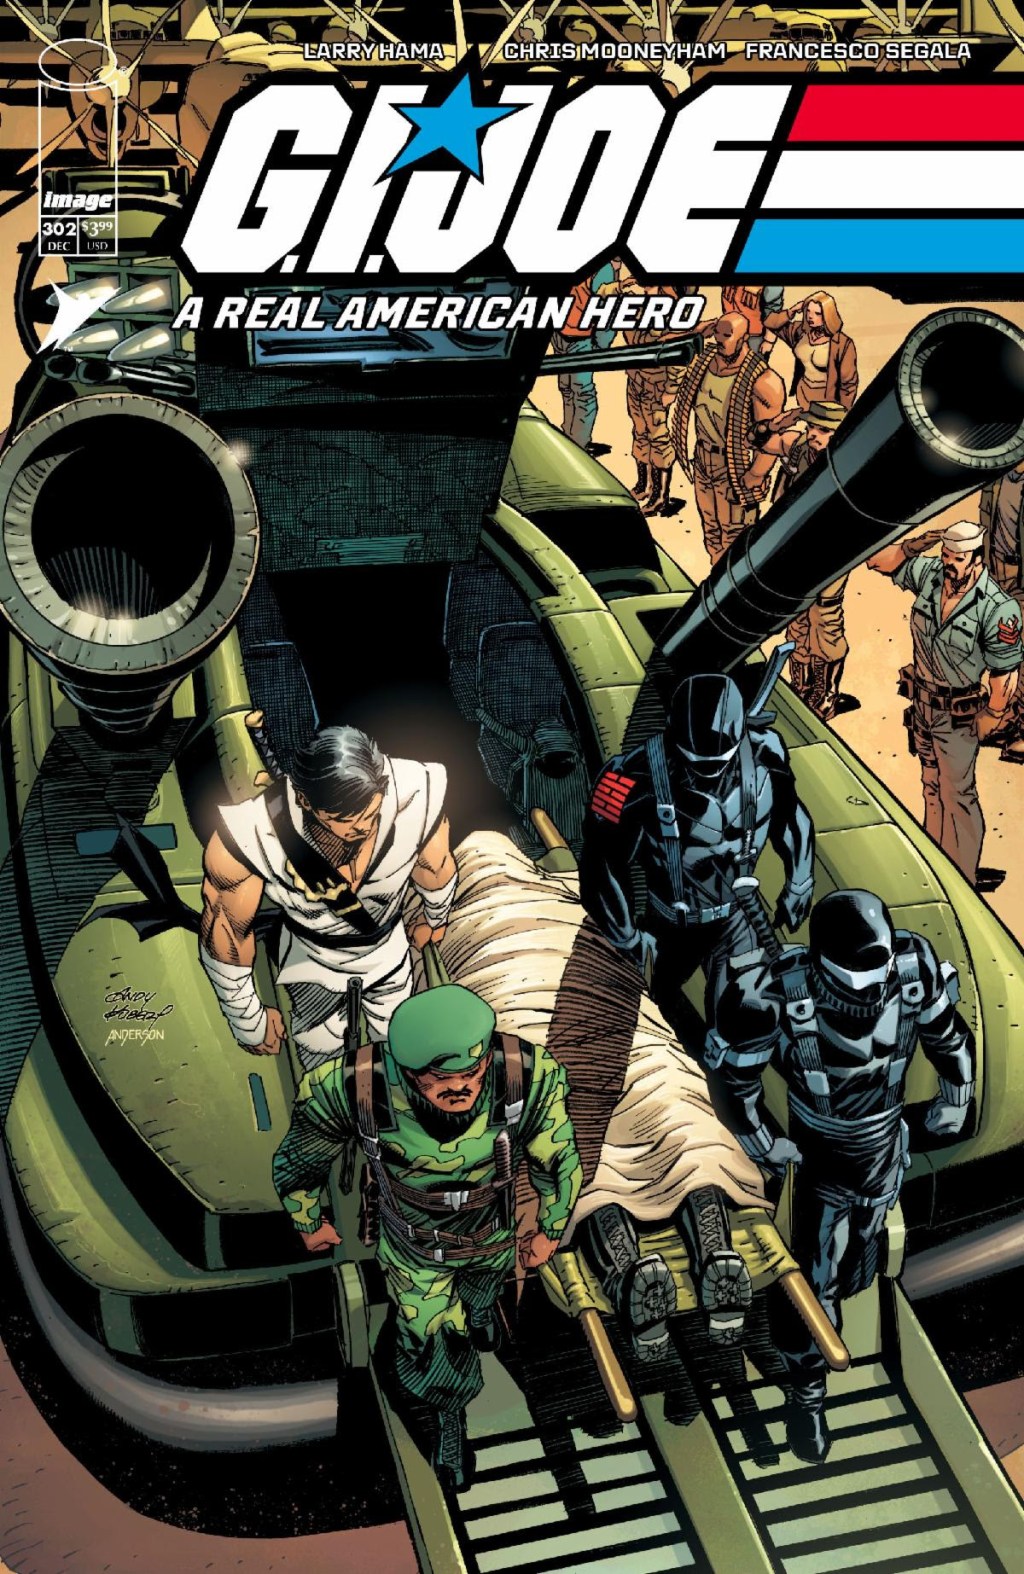 The Joes lay Wade Collins to rest on Andy Kubert and Brad Anderson's variant cover to G.I. Joe: A Real American Hero Vol. 1 #302 (2023), Skybound Comics